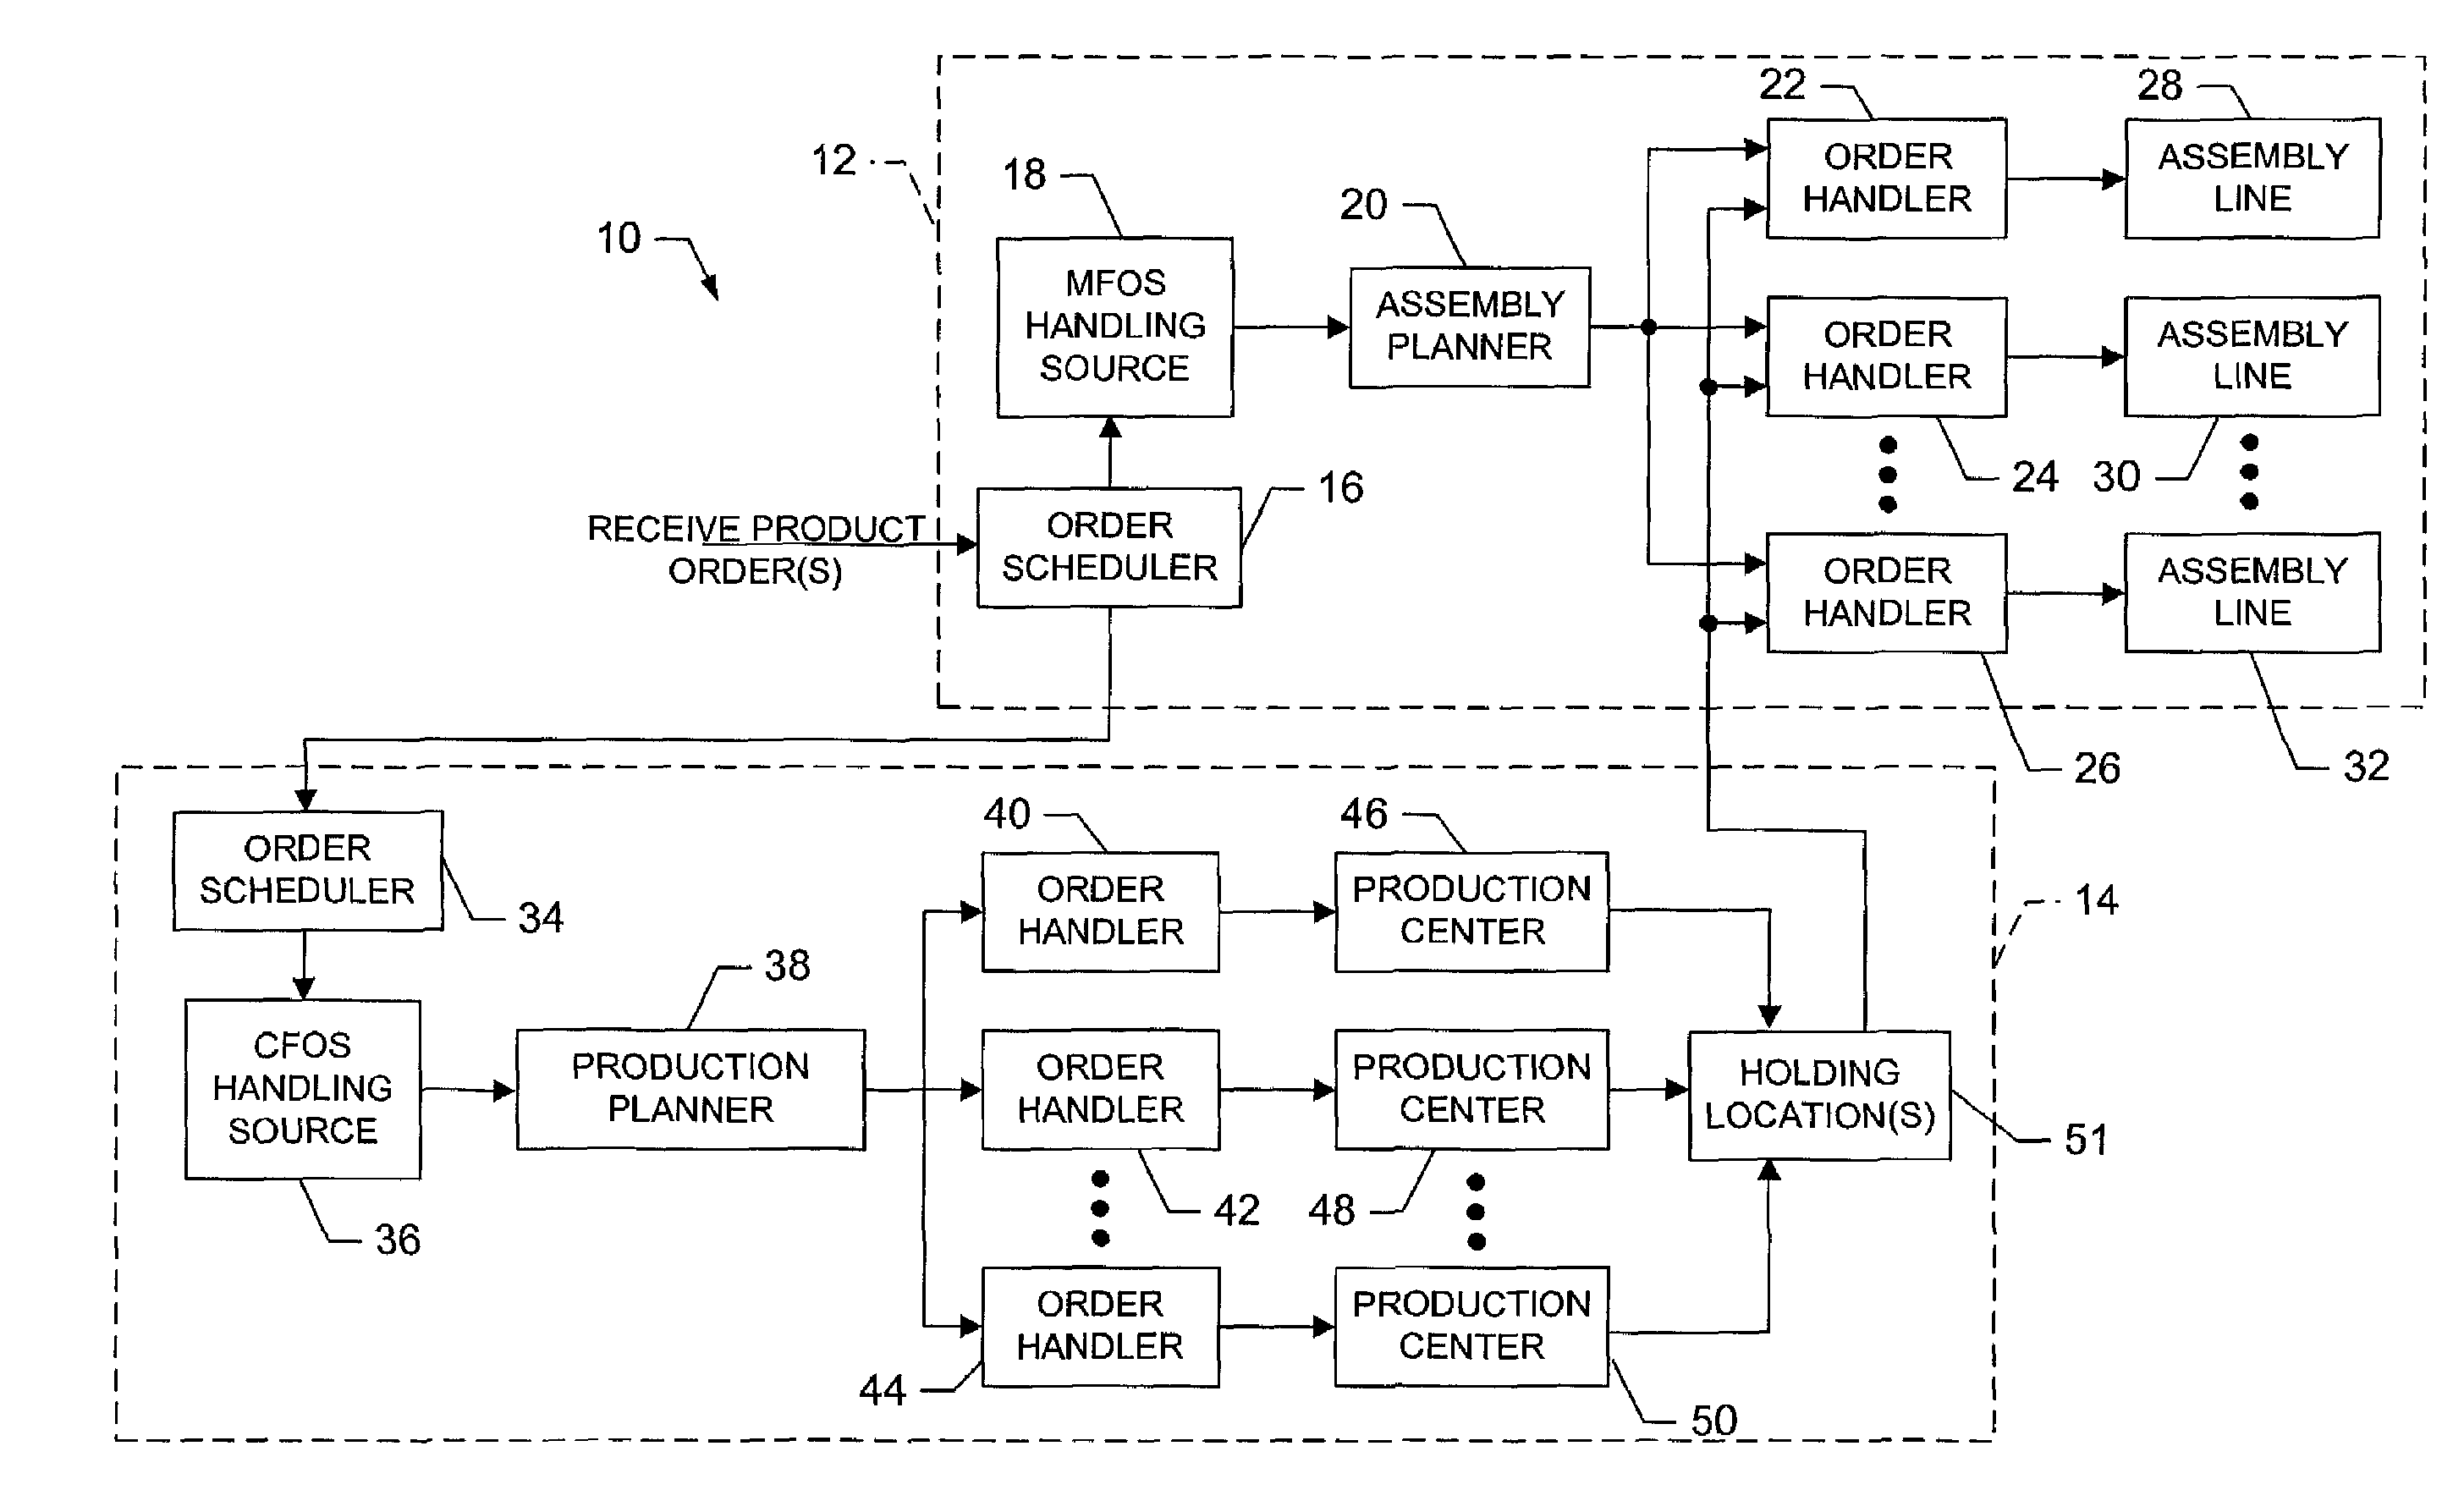 Systems and methods for manufacturing a product in a pull and push manufacturing system and associated methods and computer program products for modeling the same